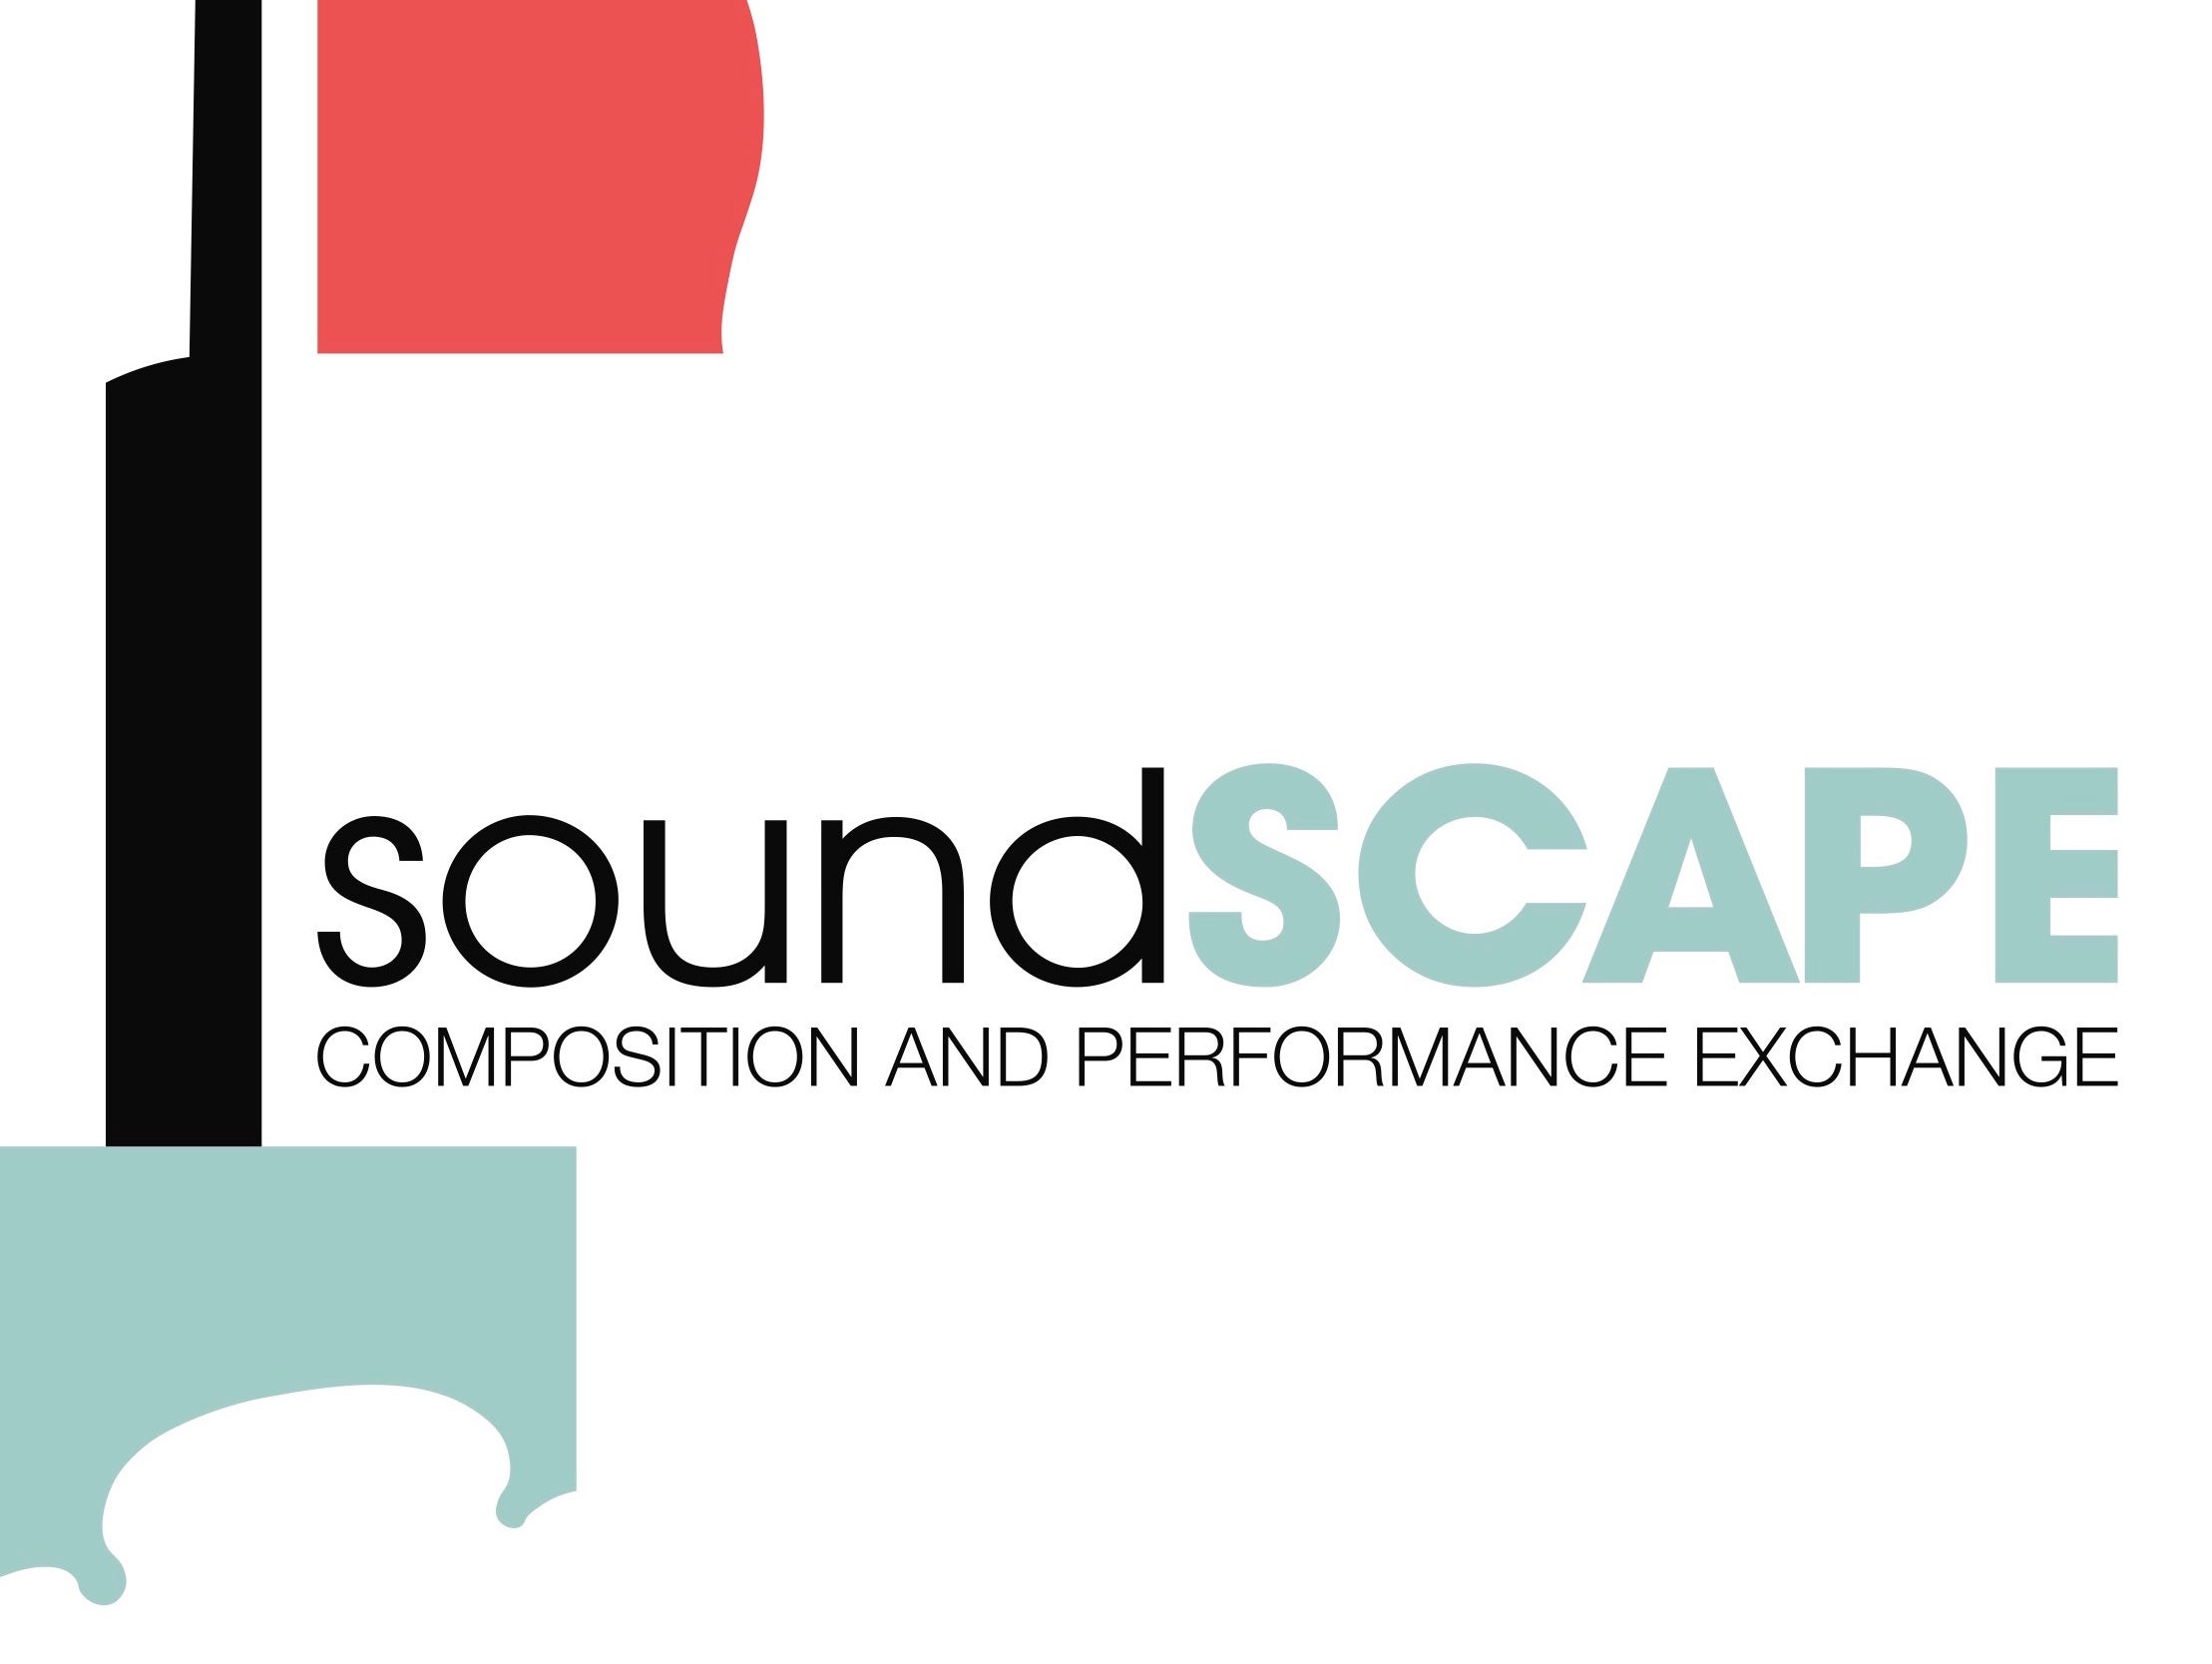 Conservatory Alumni and Faculty Featured in soundSCAPE Festival Tour |  Oberlin College and Conservatory